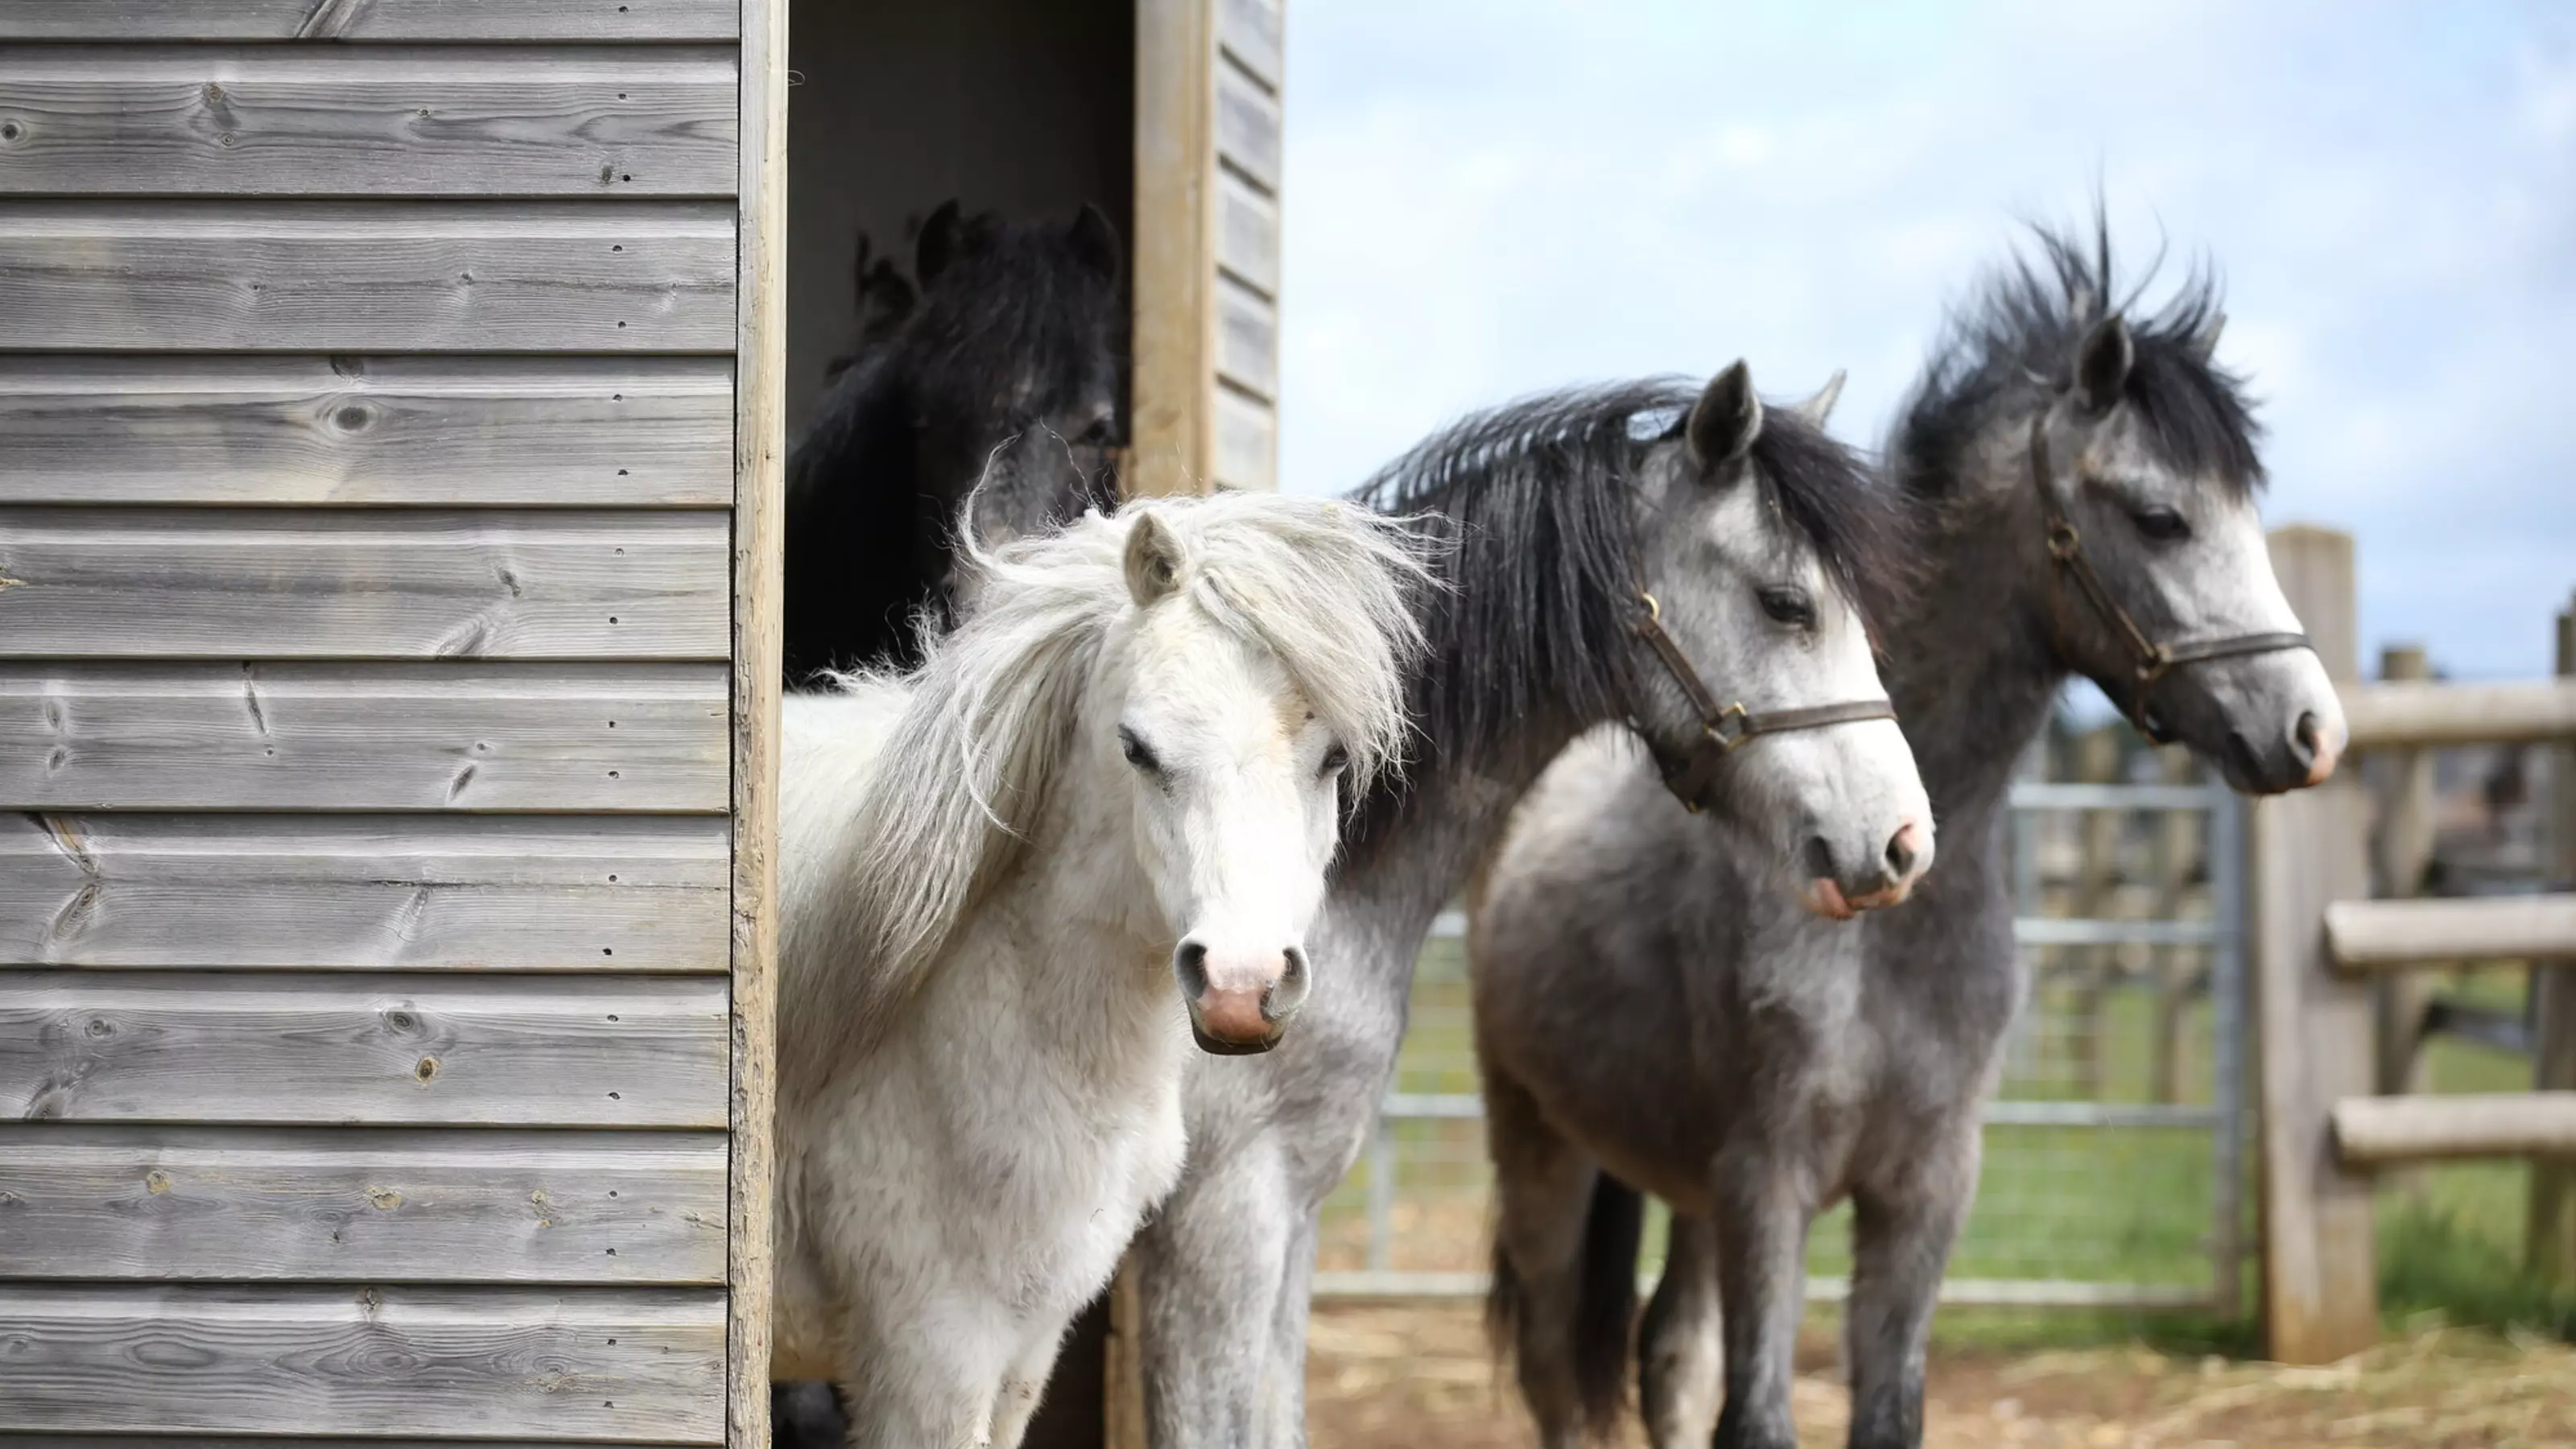 Two grey horses and a white horse under an outside shelter